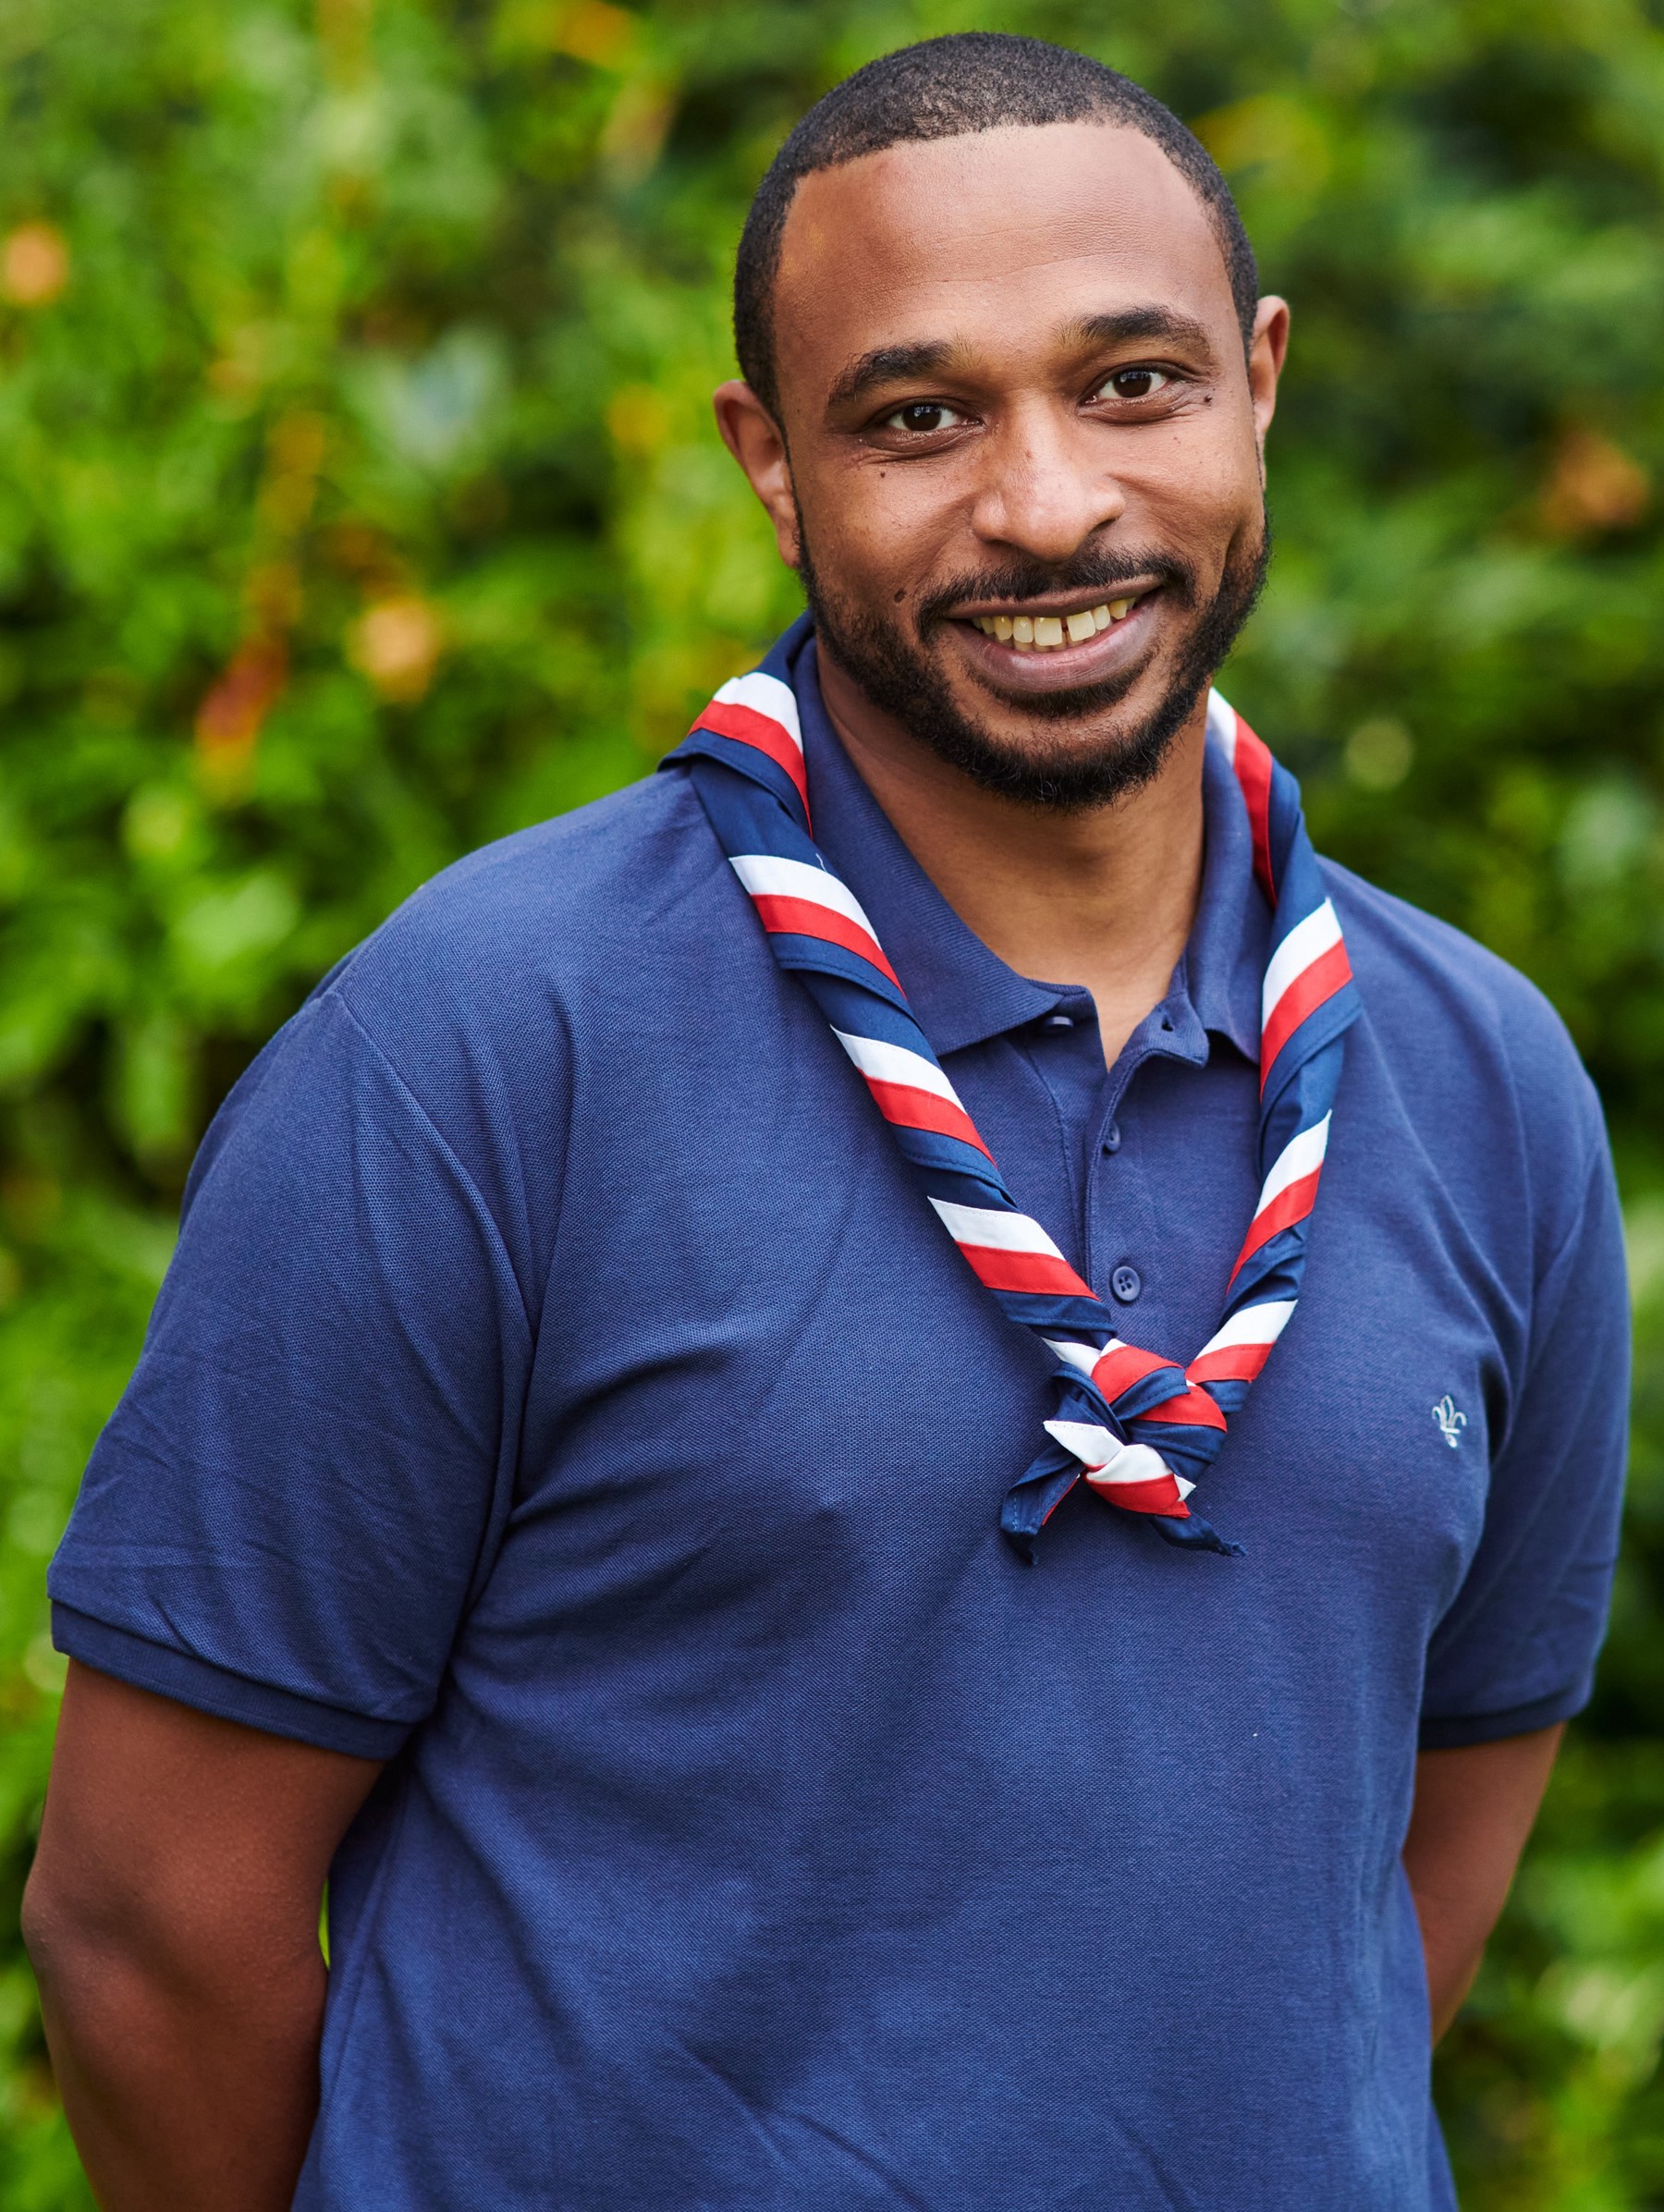 Yousif Eltom smiling at the camera while wearing a navy Scouts polo shirt and stripy scarf